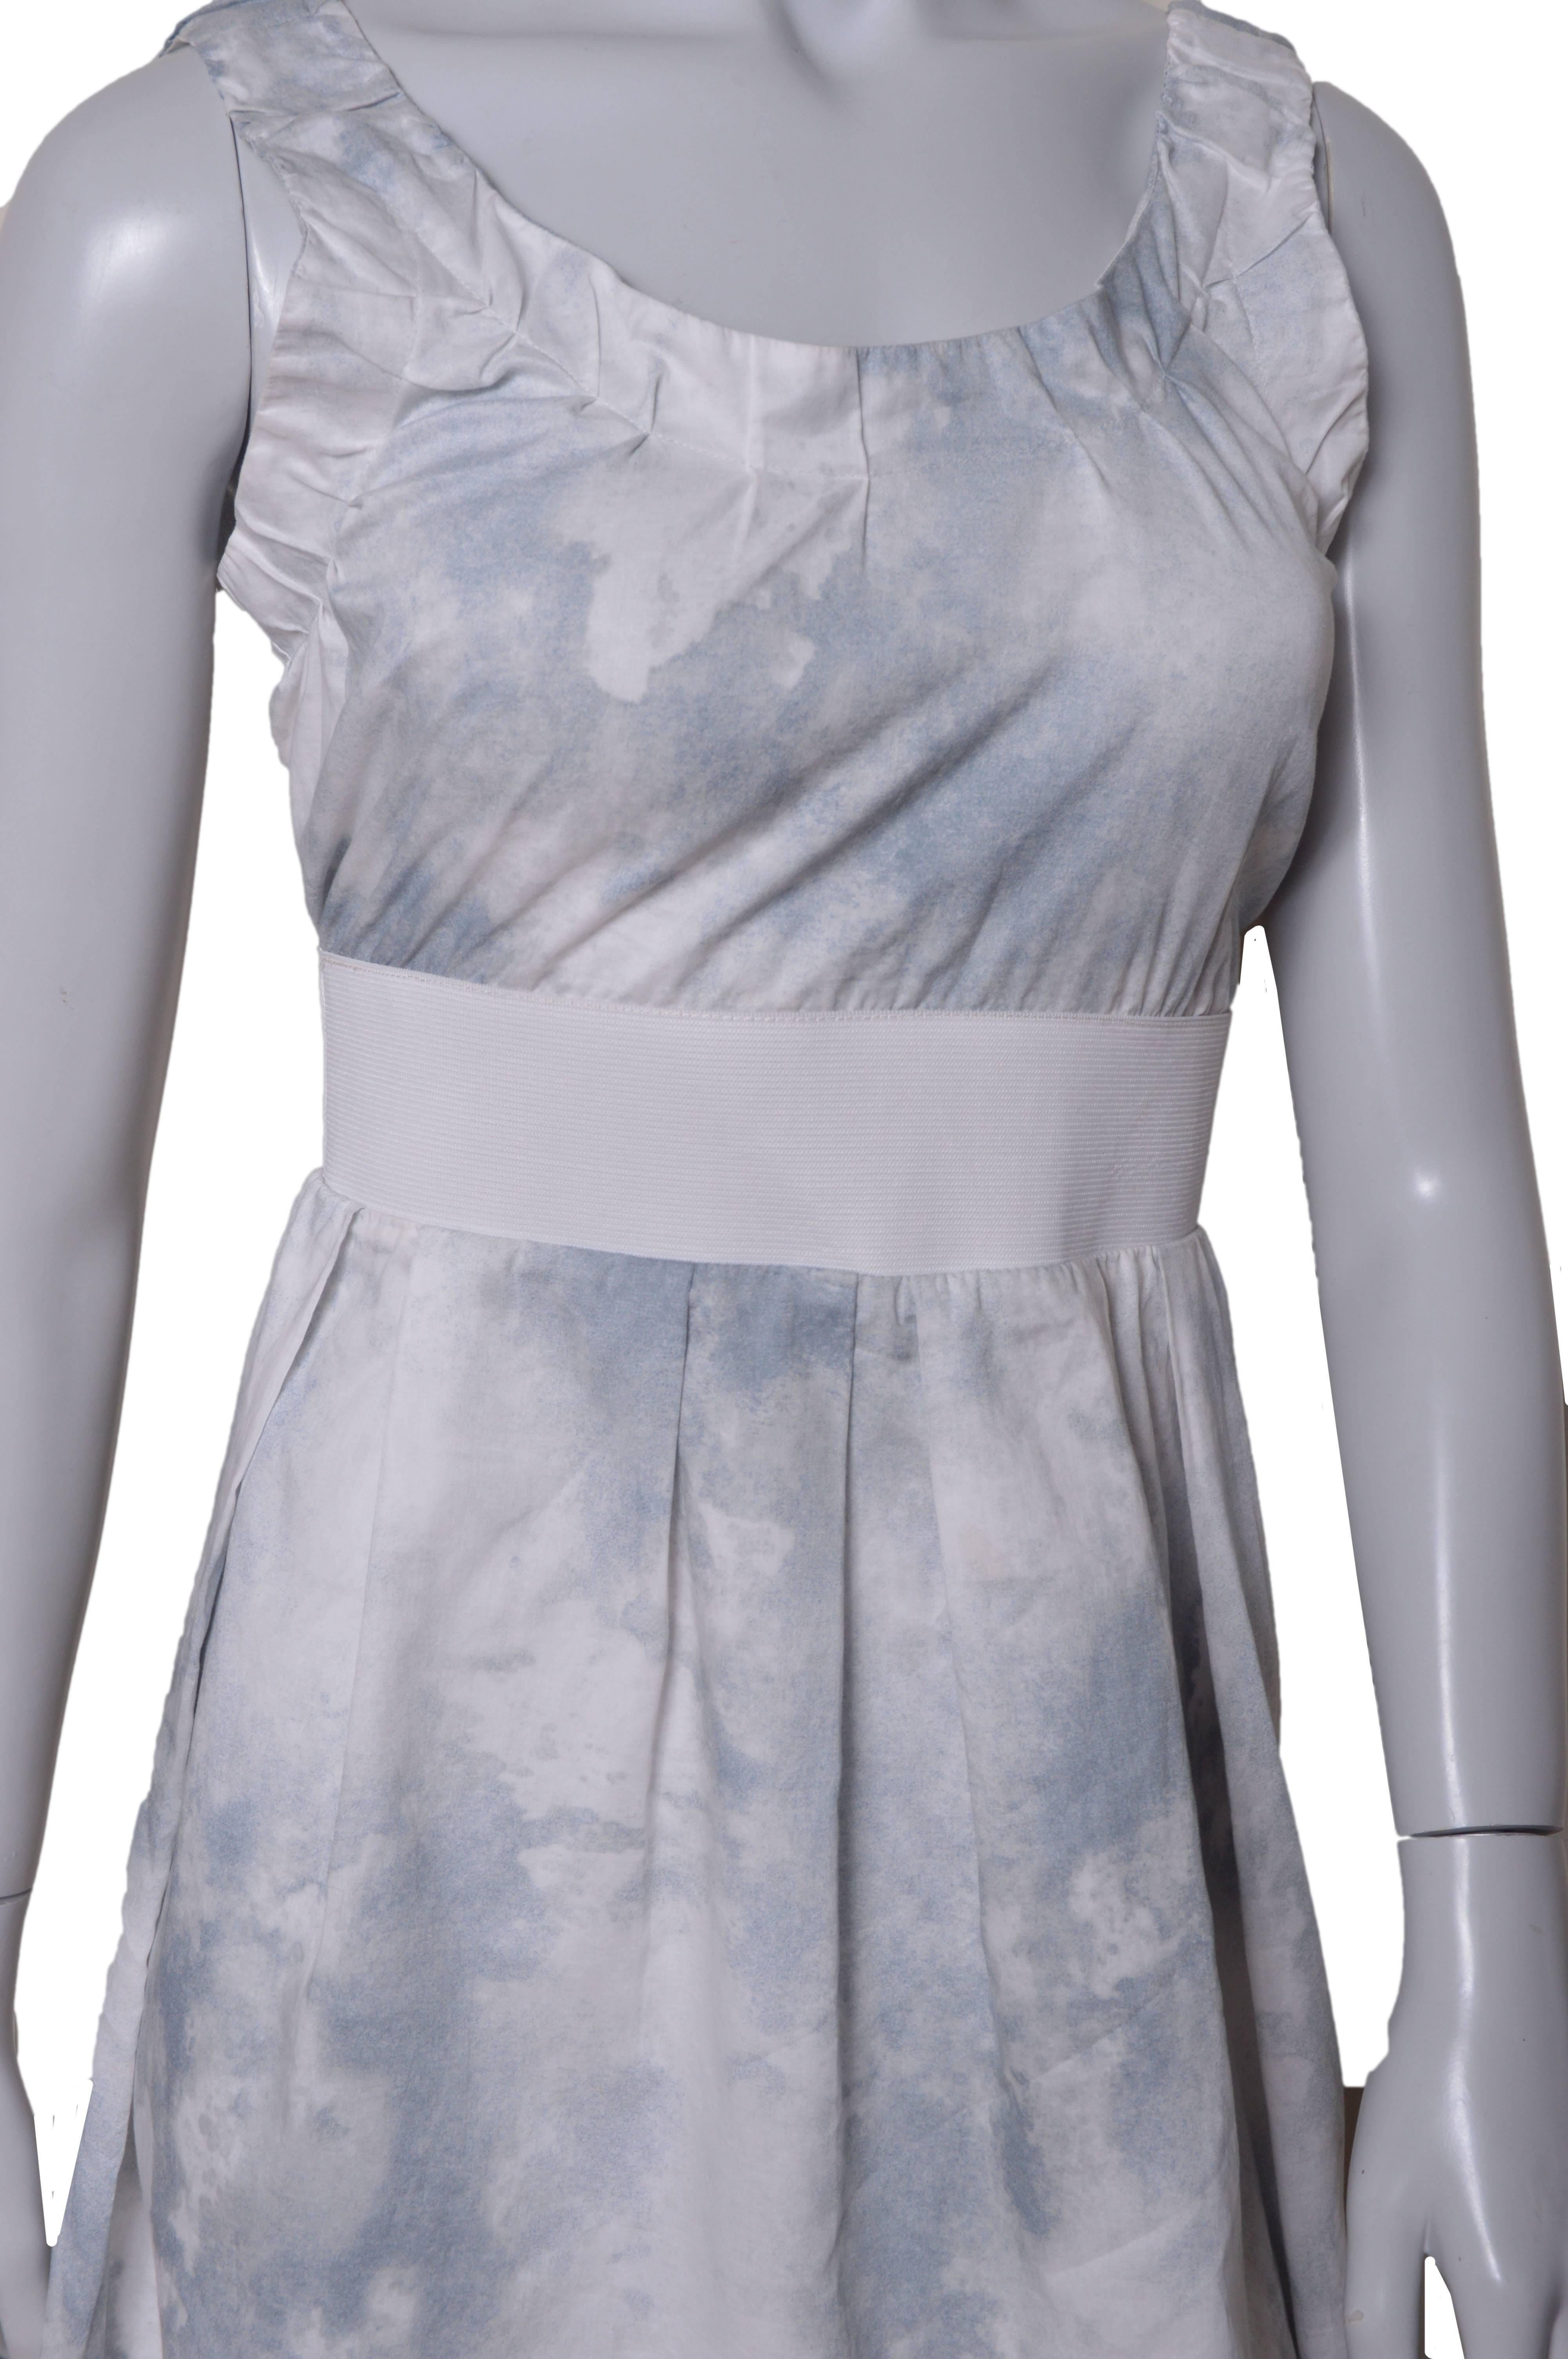 Lovely little Marni dress.
Shades of pale gray/blue on white.
Spattered watercolor effect.
Open back.
Ruched straps.
Wide white elastic waistband.
Inverted pleat skirt.
Tag size 40. Refer to measurements.